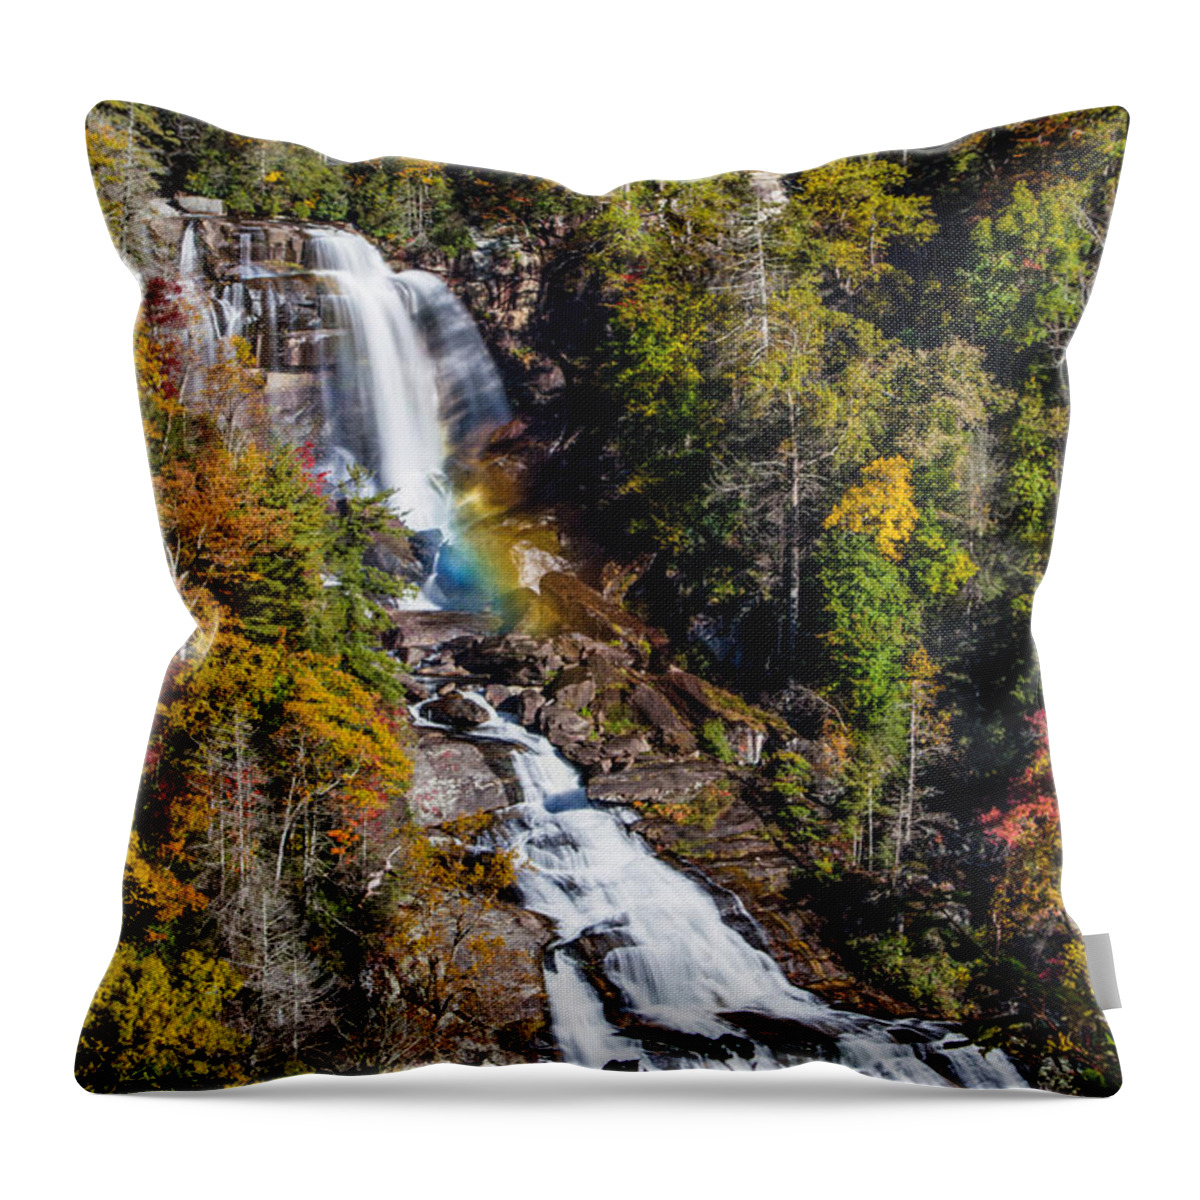 Whitewater Falls Throw Pillow featuring the photograph Whitewater Falls with Rainbow by John Haldane